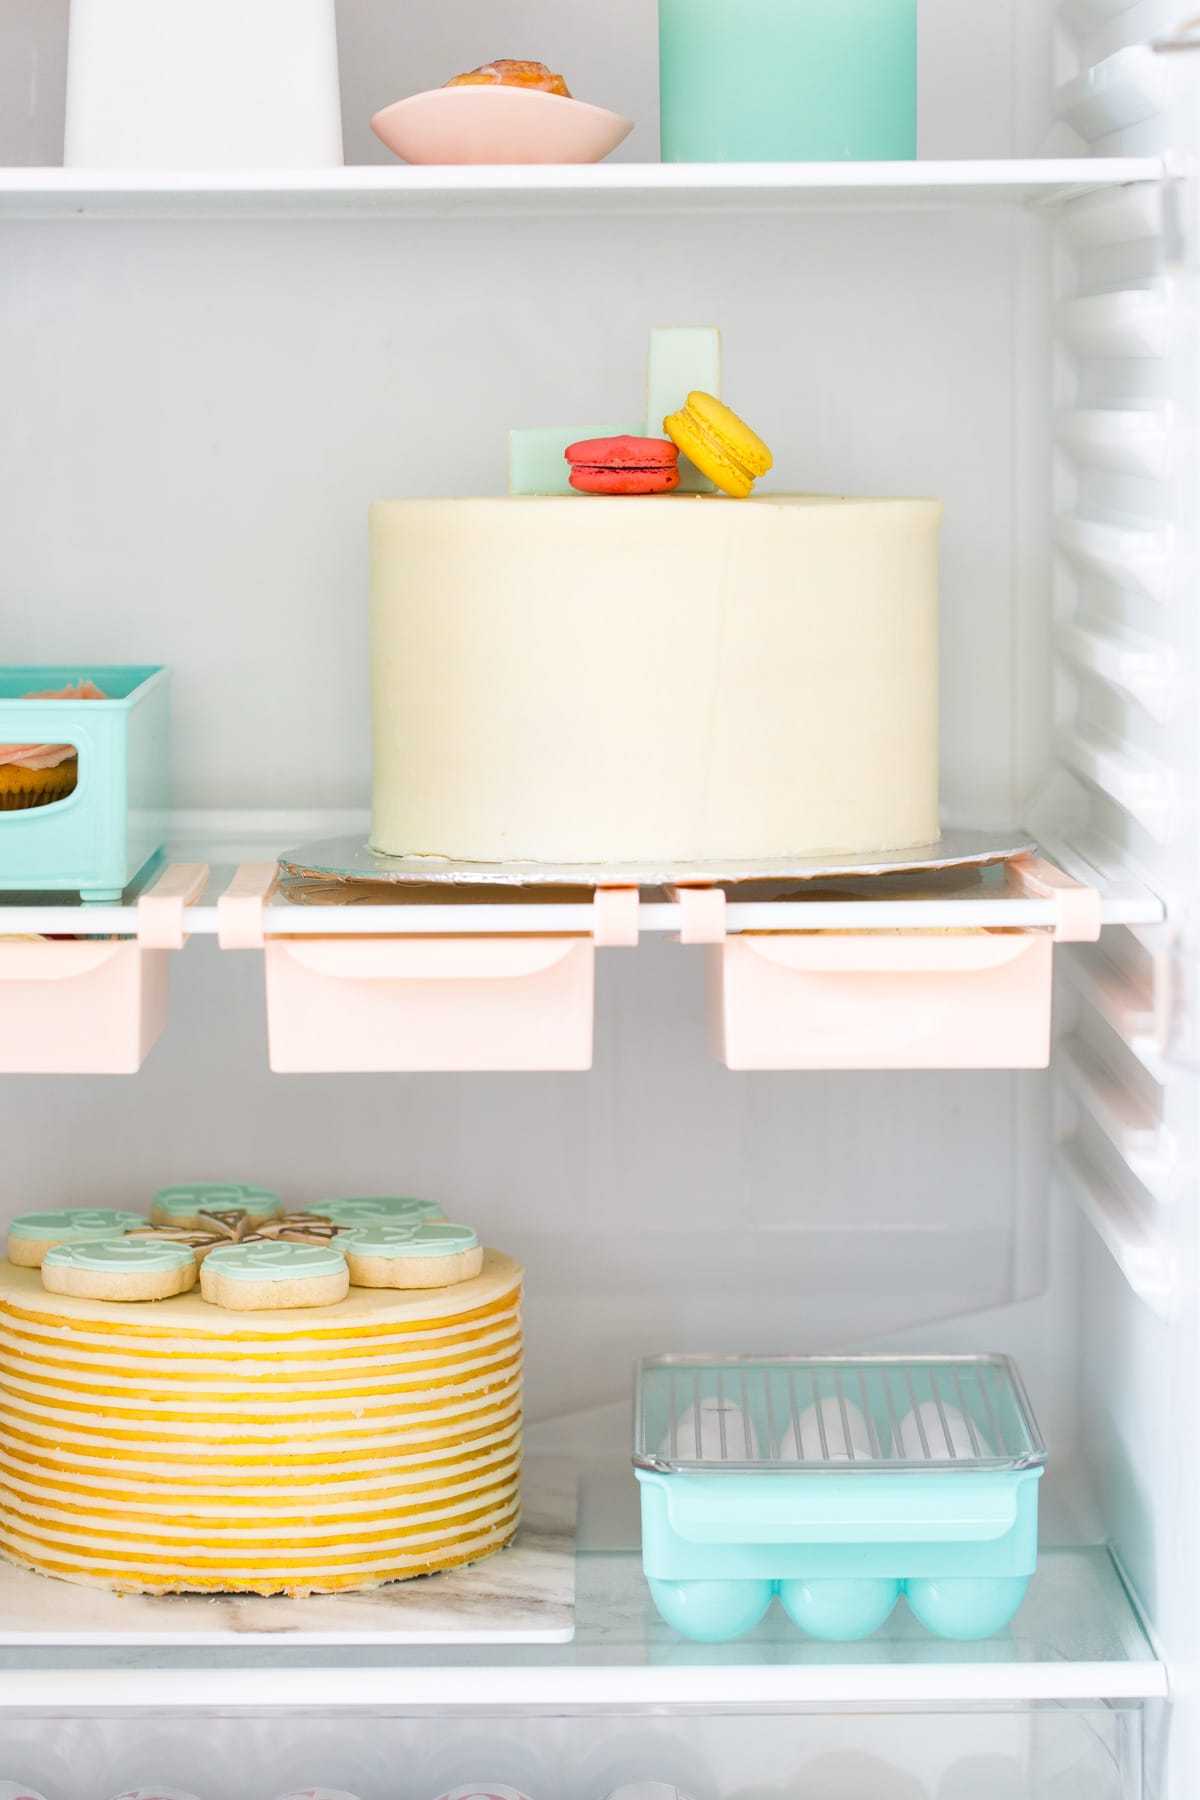 6 Oddly Satisfying Spring Refrigerator Cleaning Hacks by top Houston lifestyle Blogger Ashley Rose of Sugar & Cloth